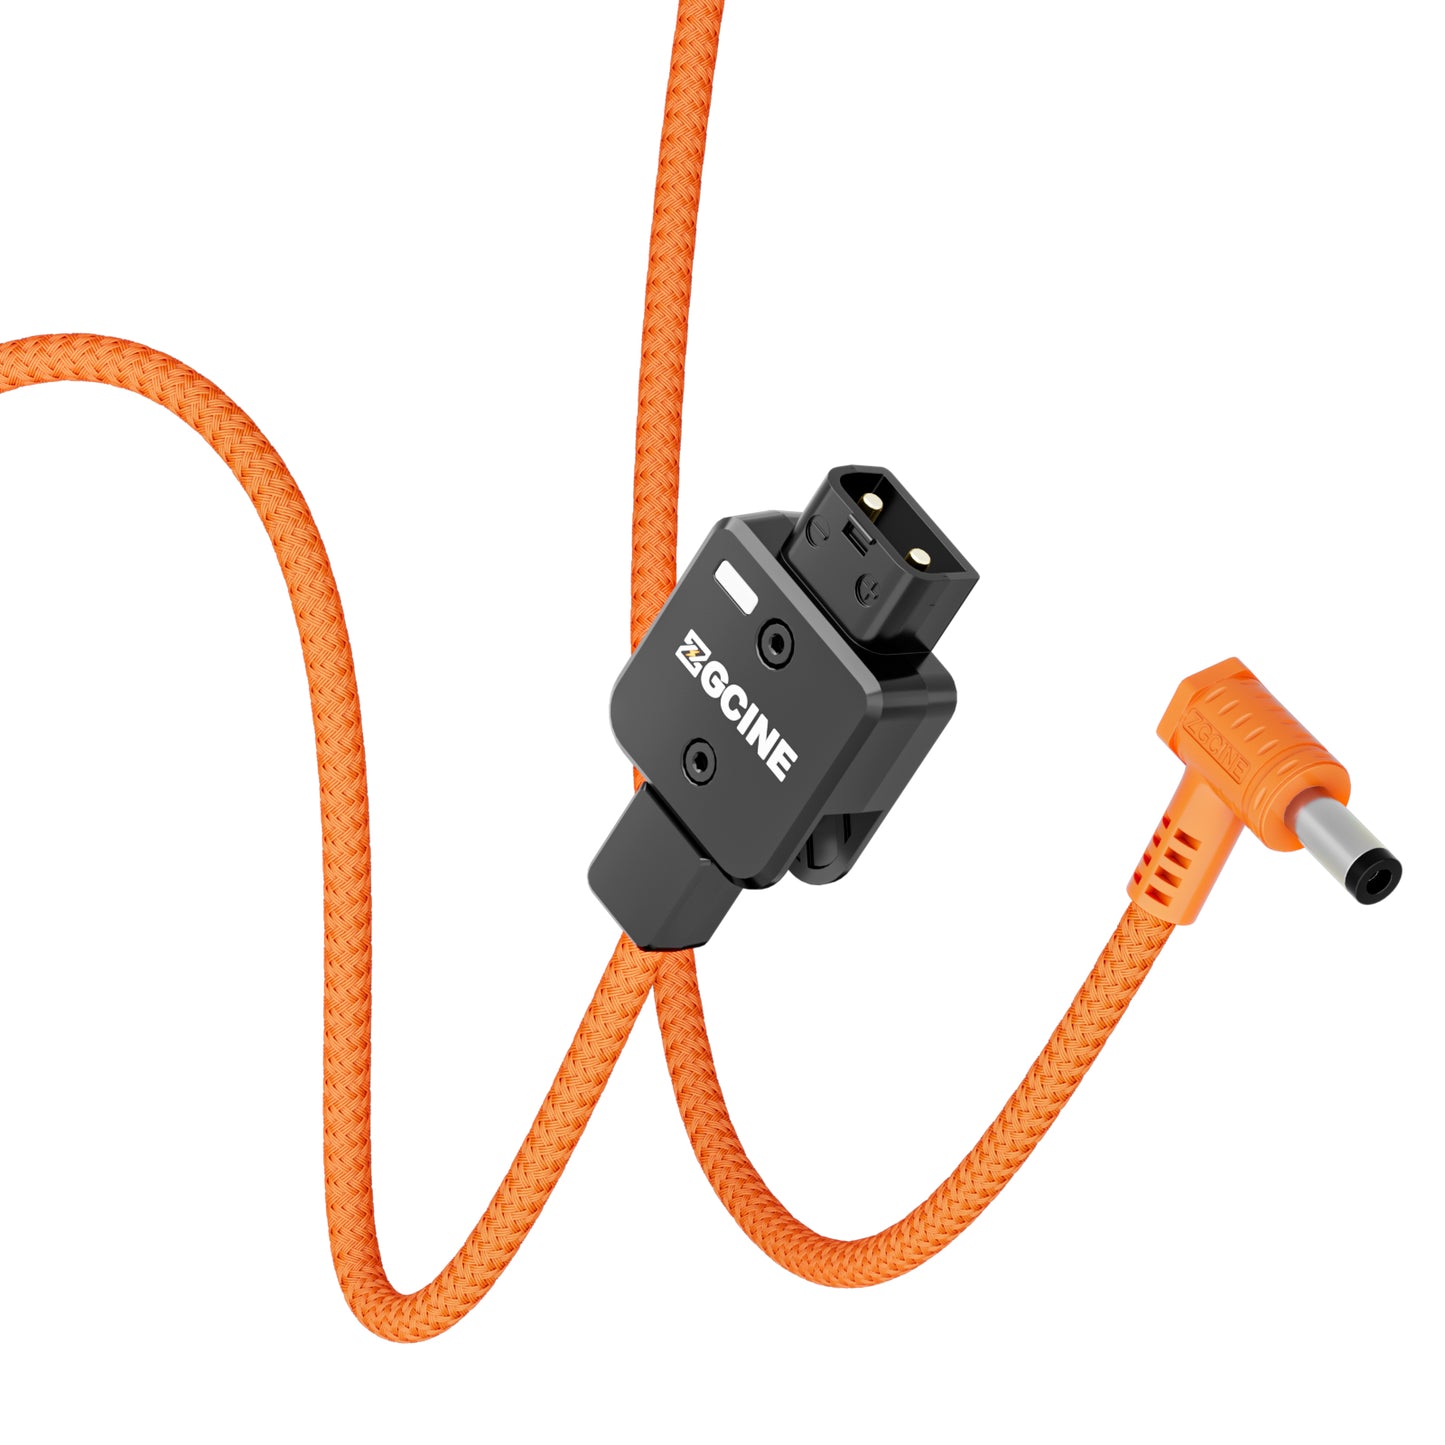 ZGCINE D-Tap to DC Power Cable 5.5*2.5 (braided wire）